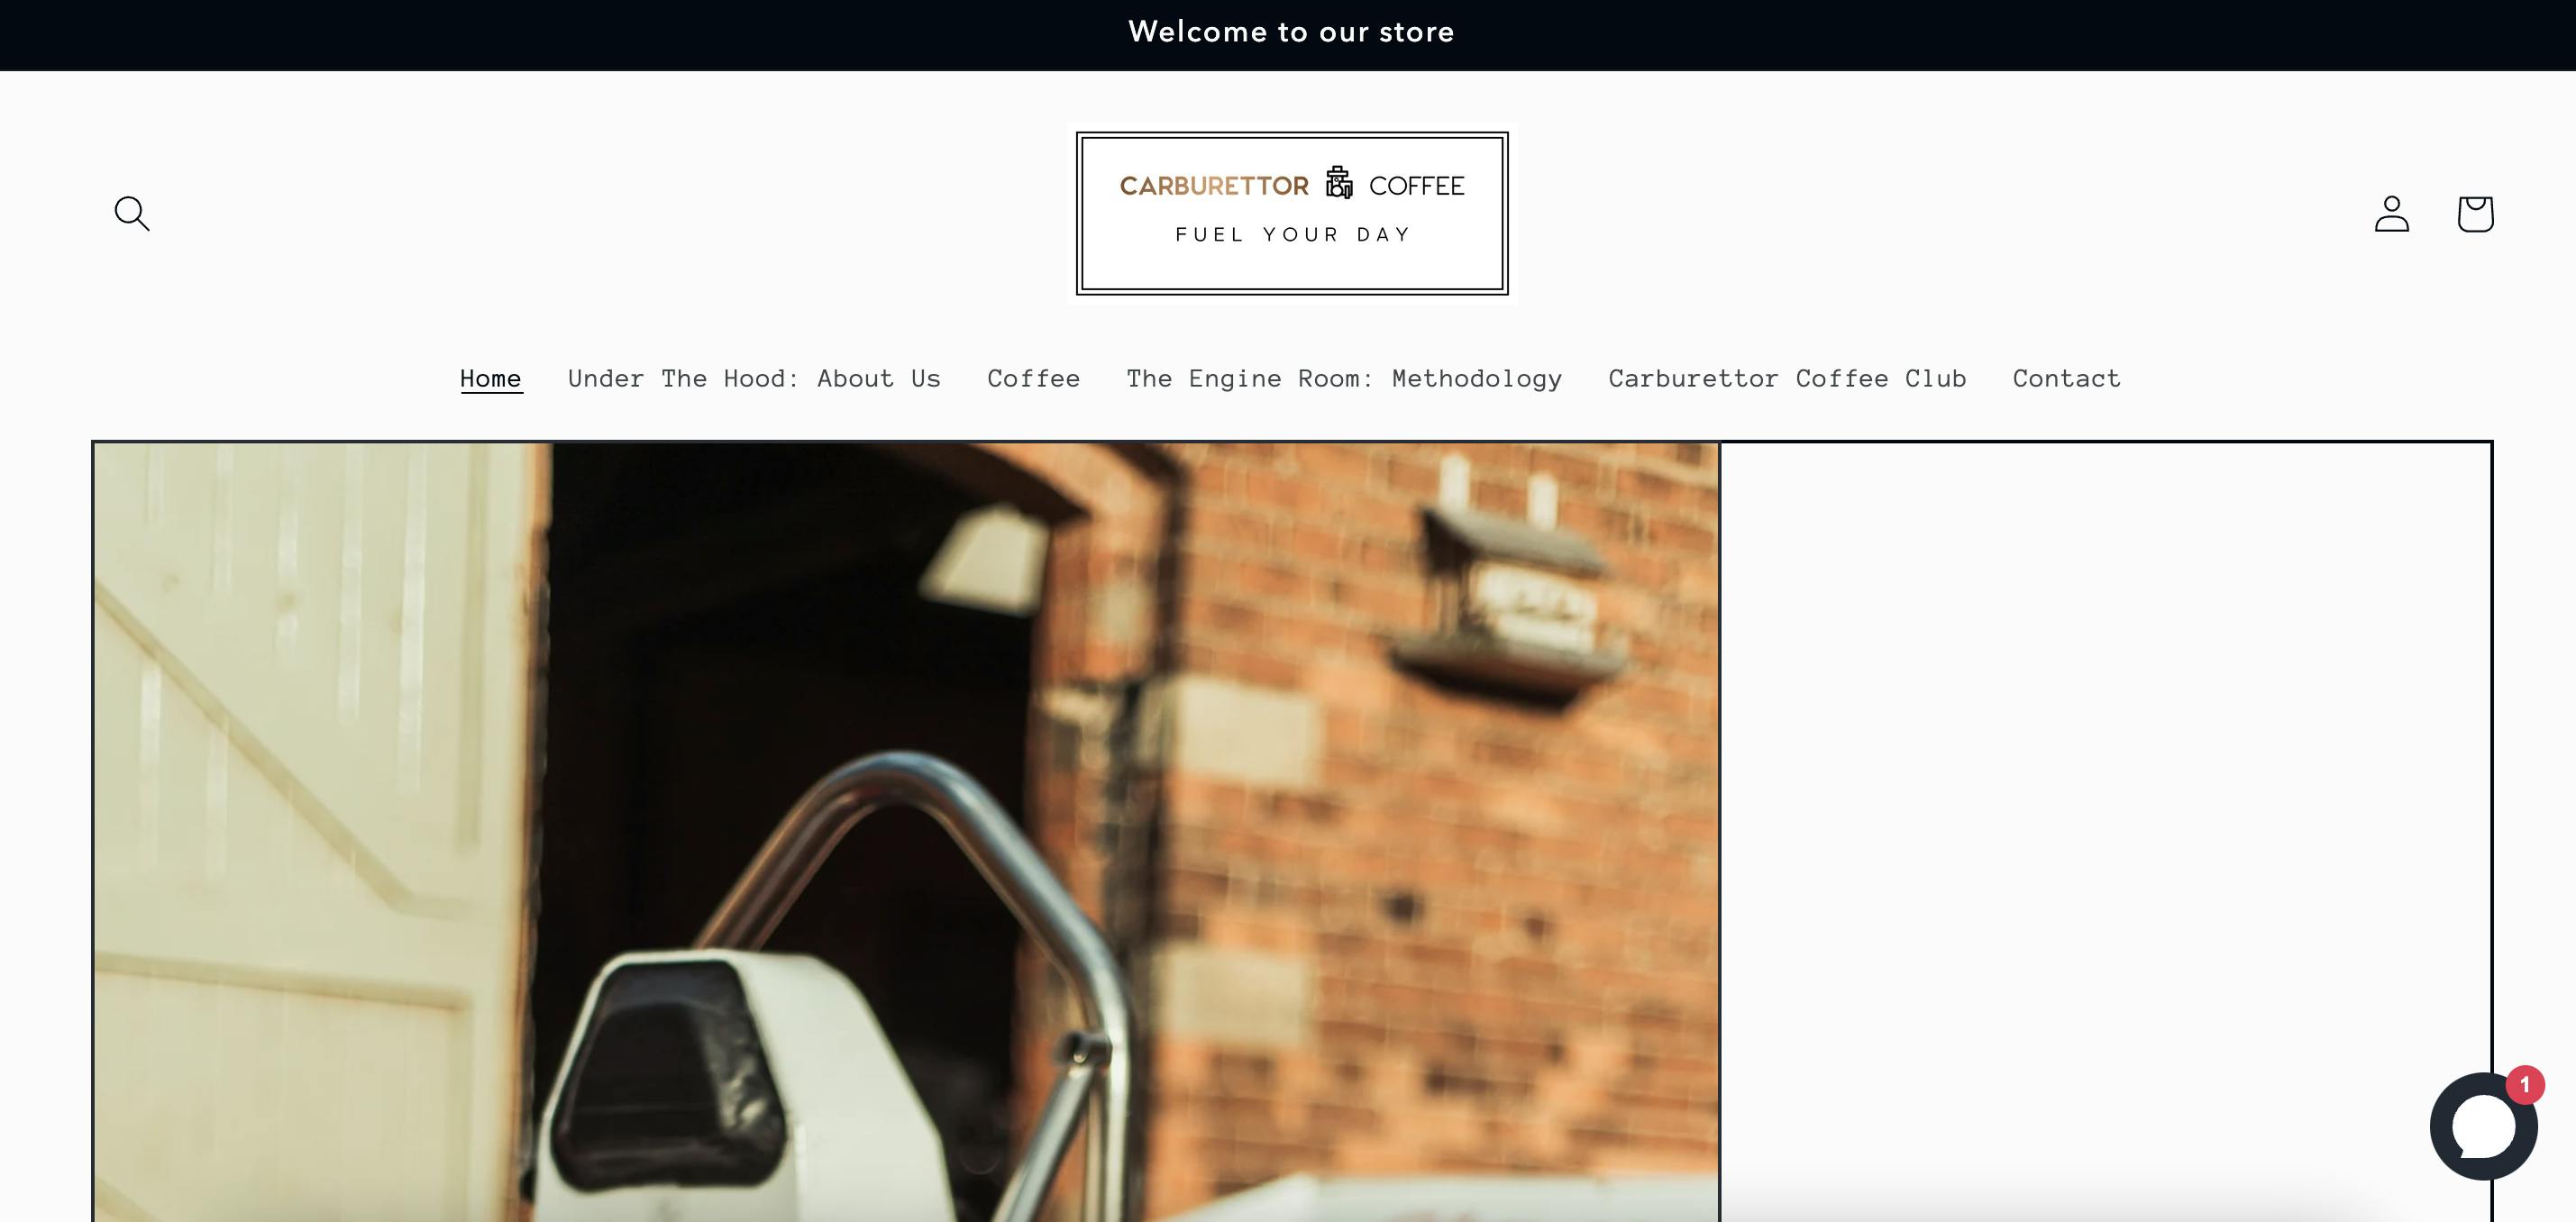 Carburettor Coffee shopify site